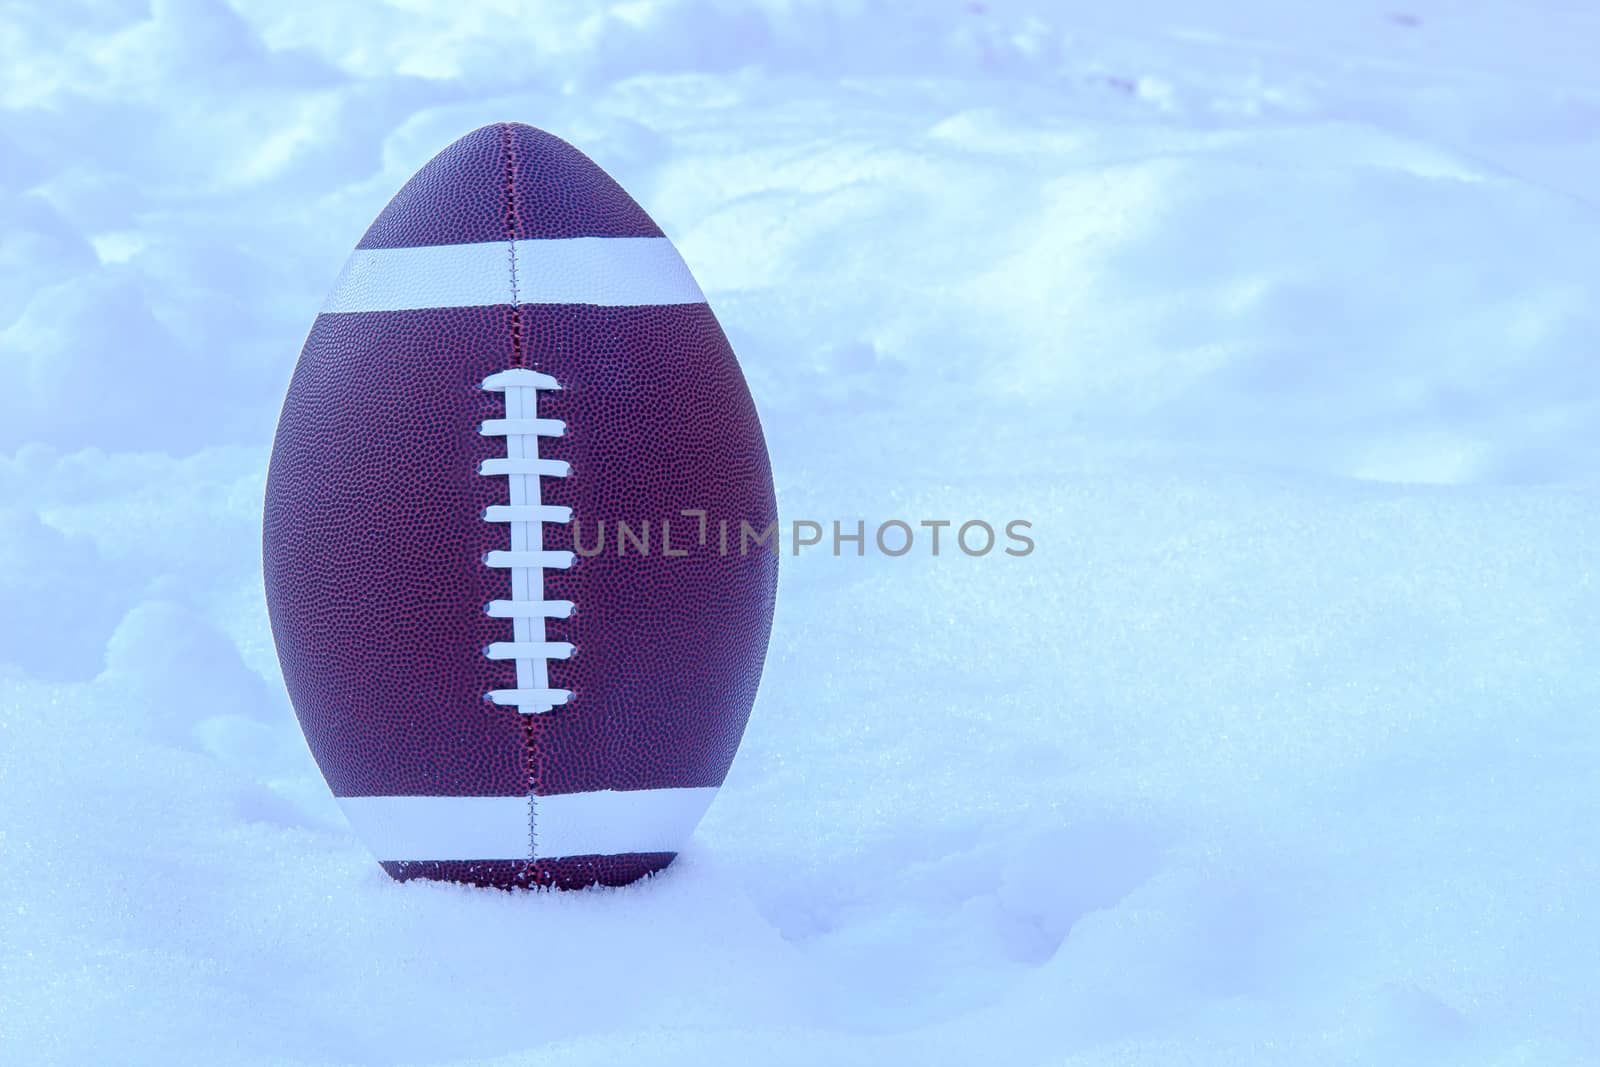 American football on Snow during winter